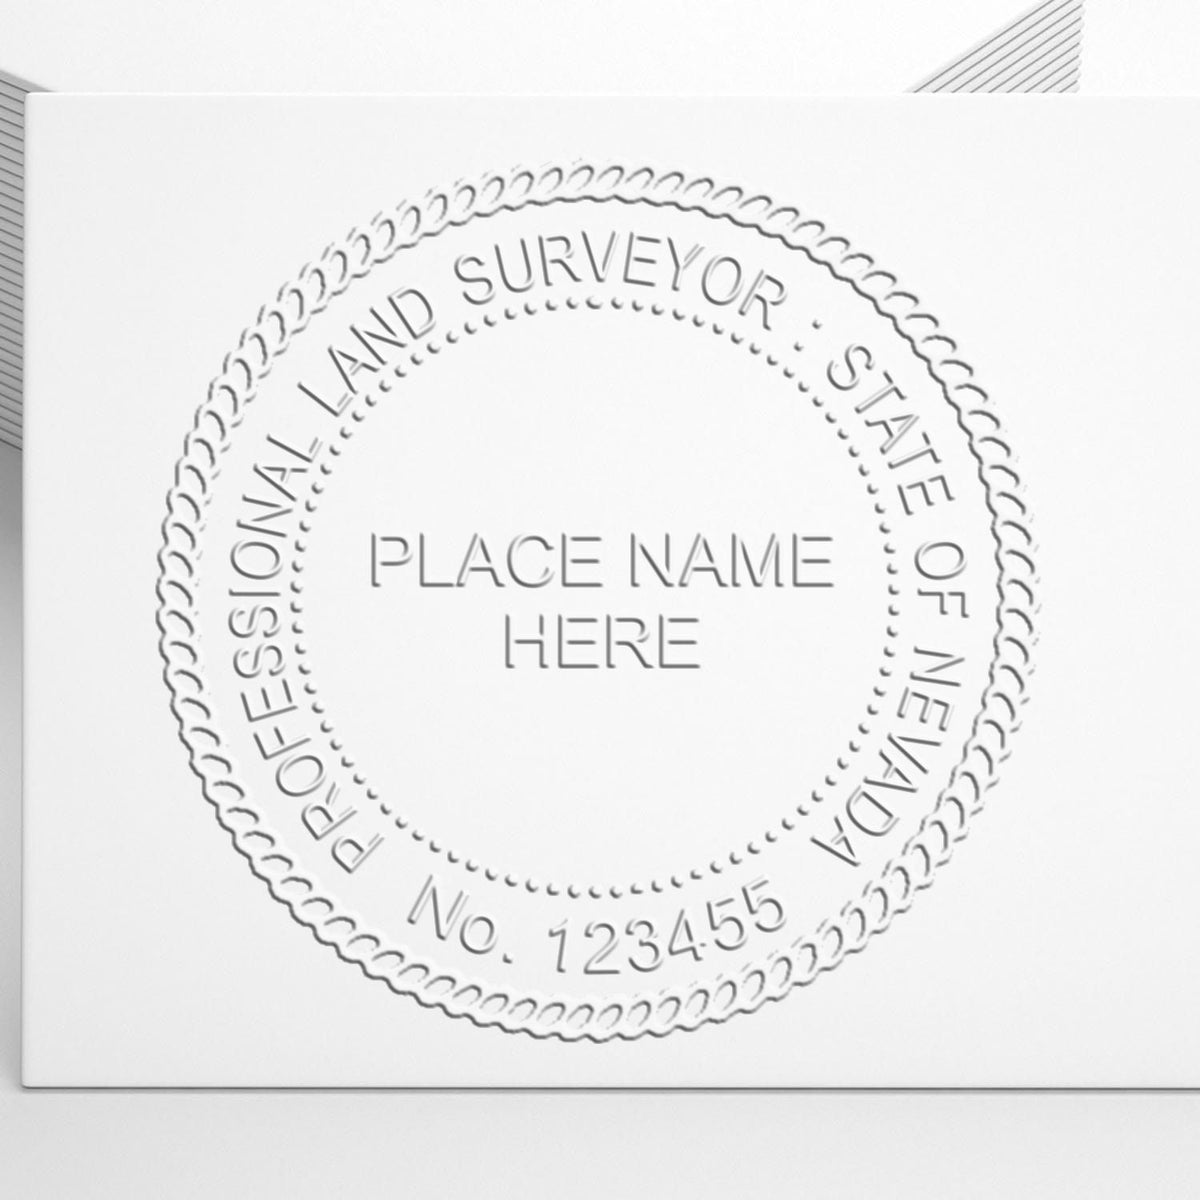 A lifestyle photo showing a stamped image of the Nevada Desk Surveyor Seal Embosser on a piece of paper